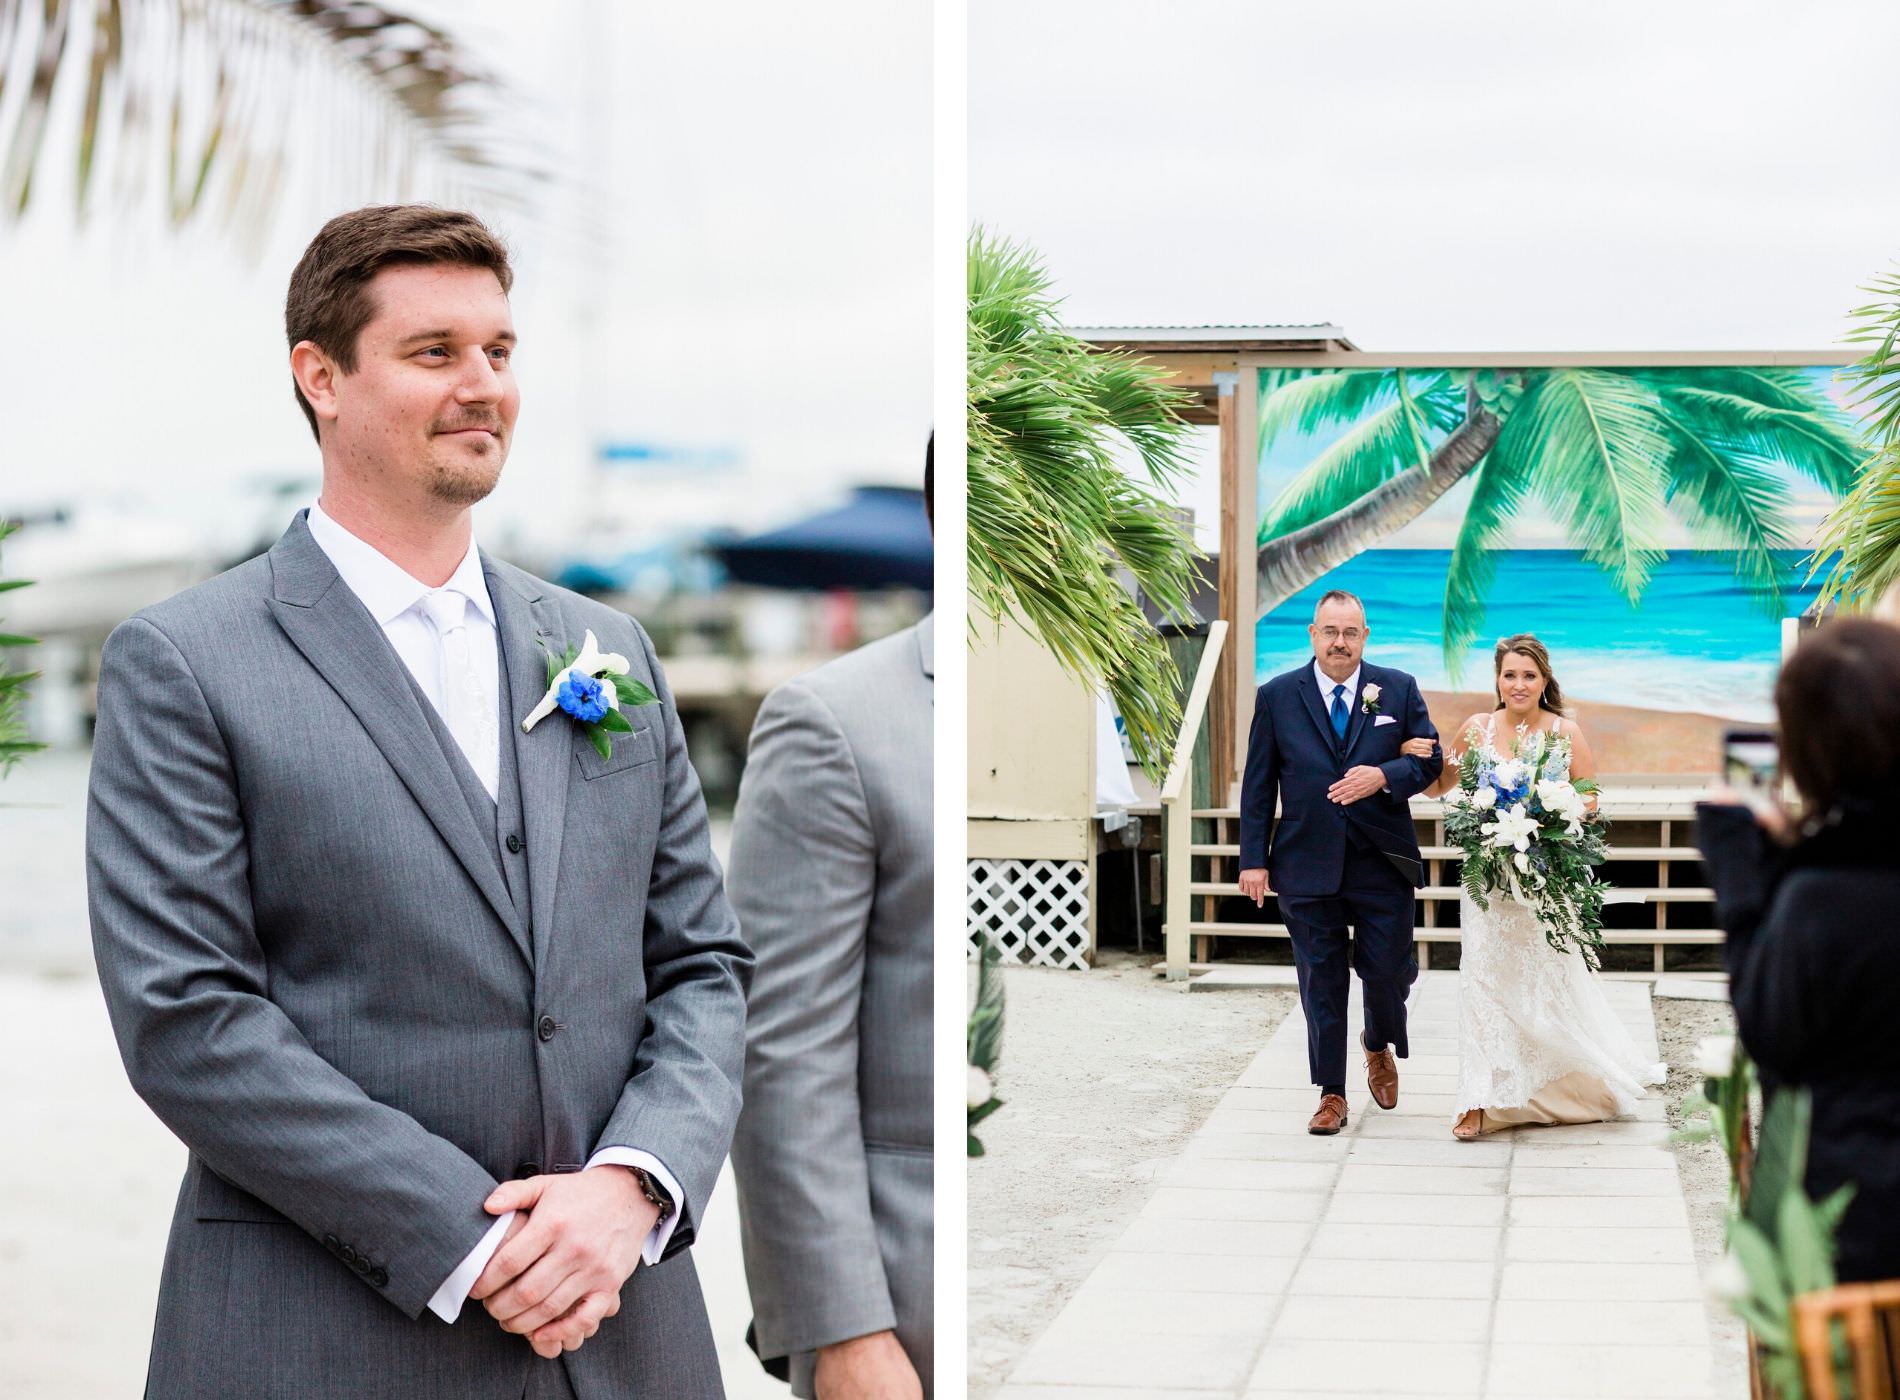 Groom Seeing His Bride for the First Time | Bride Walking Down the Aisle with her Father | St. Pete Wedding Venue Isla Del Sol | Groom Charcoal Grey Suit